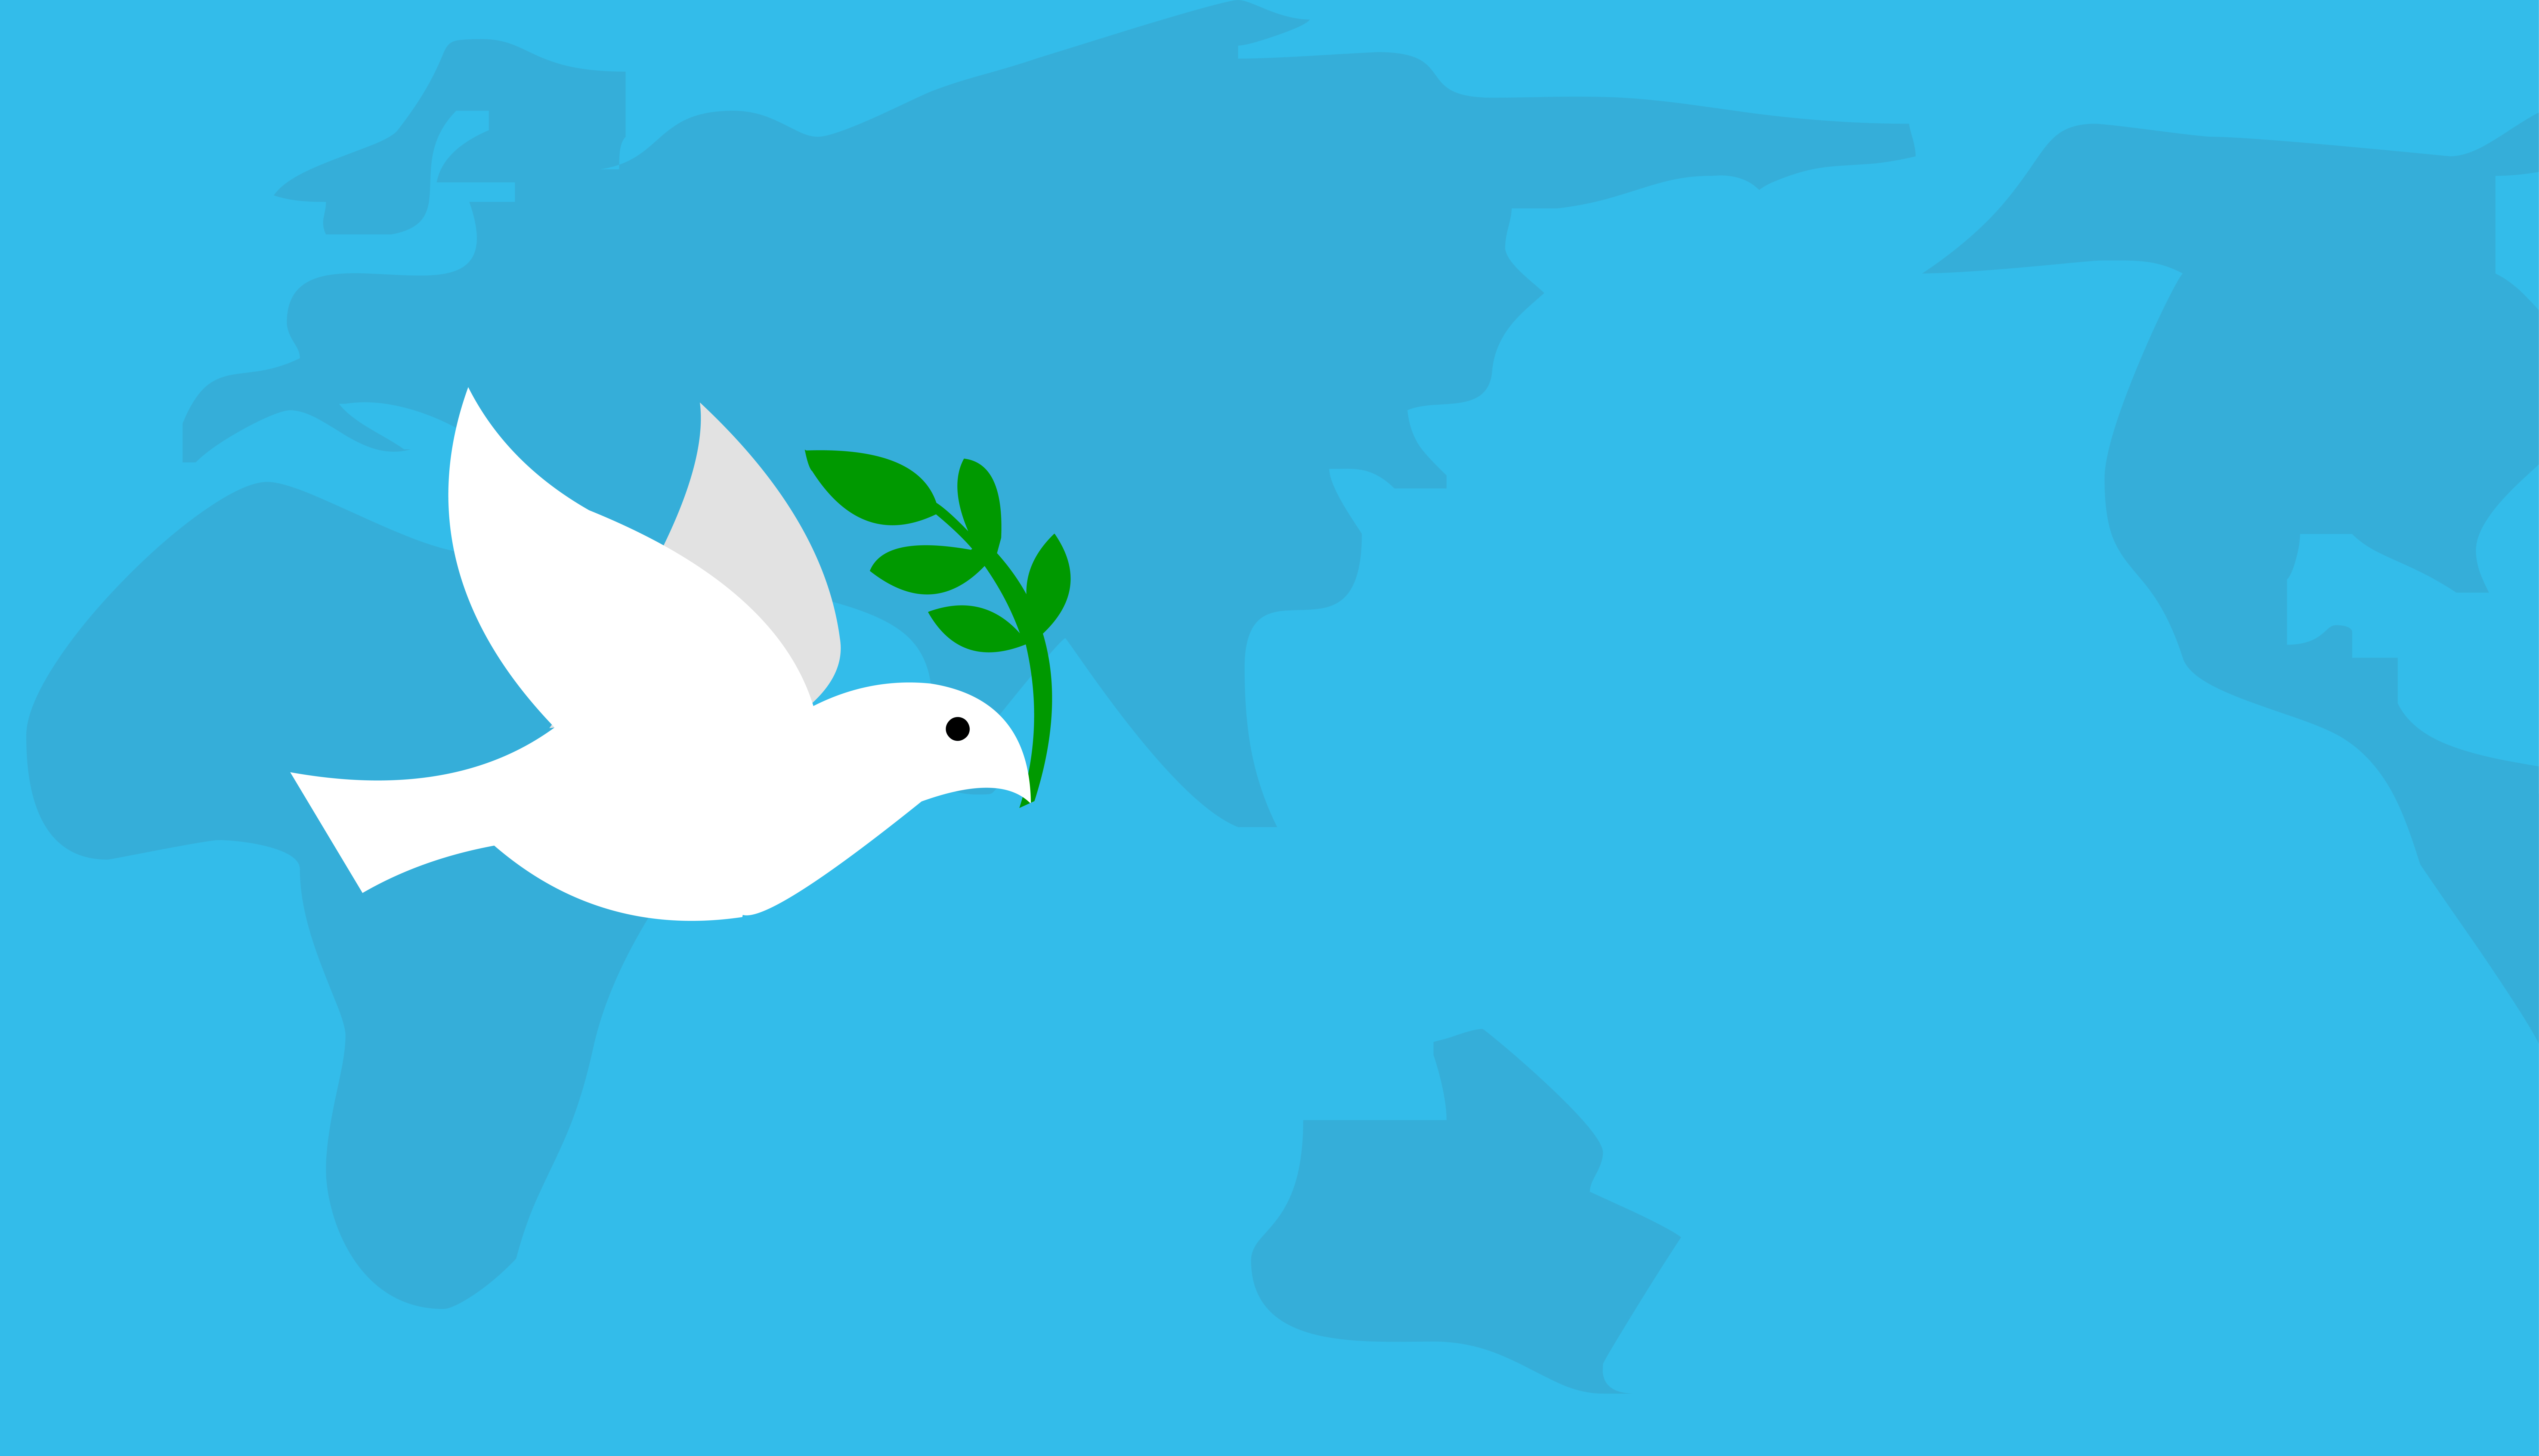 A dove carrying a branch in its beak flying over a map of the world